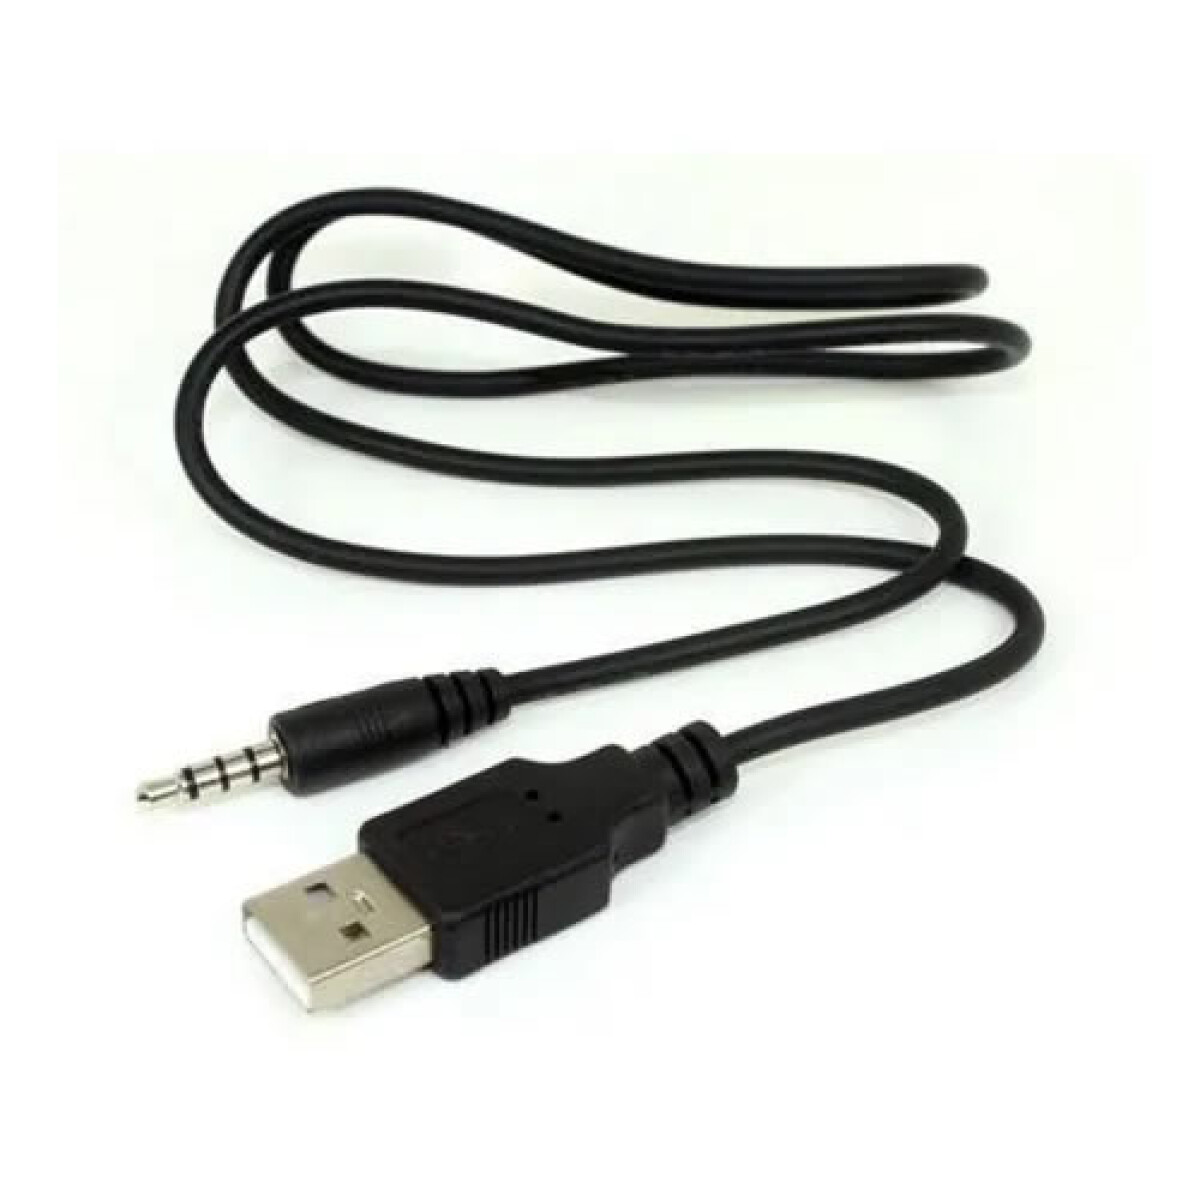 Cable Spica jack 3,5mm a USB macho 